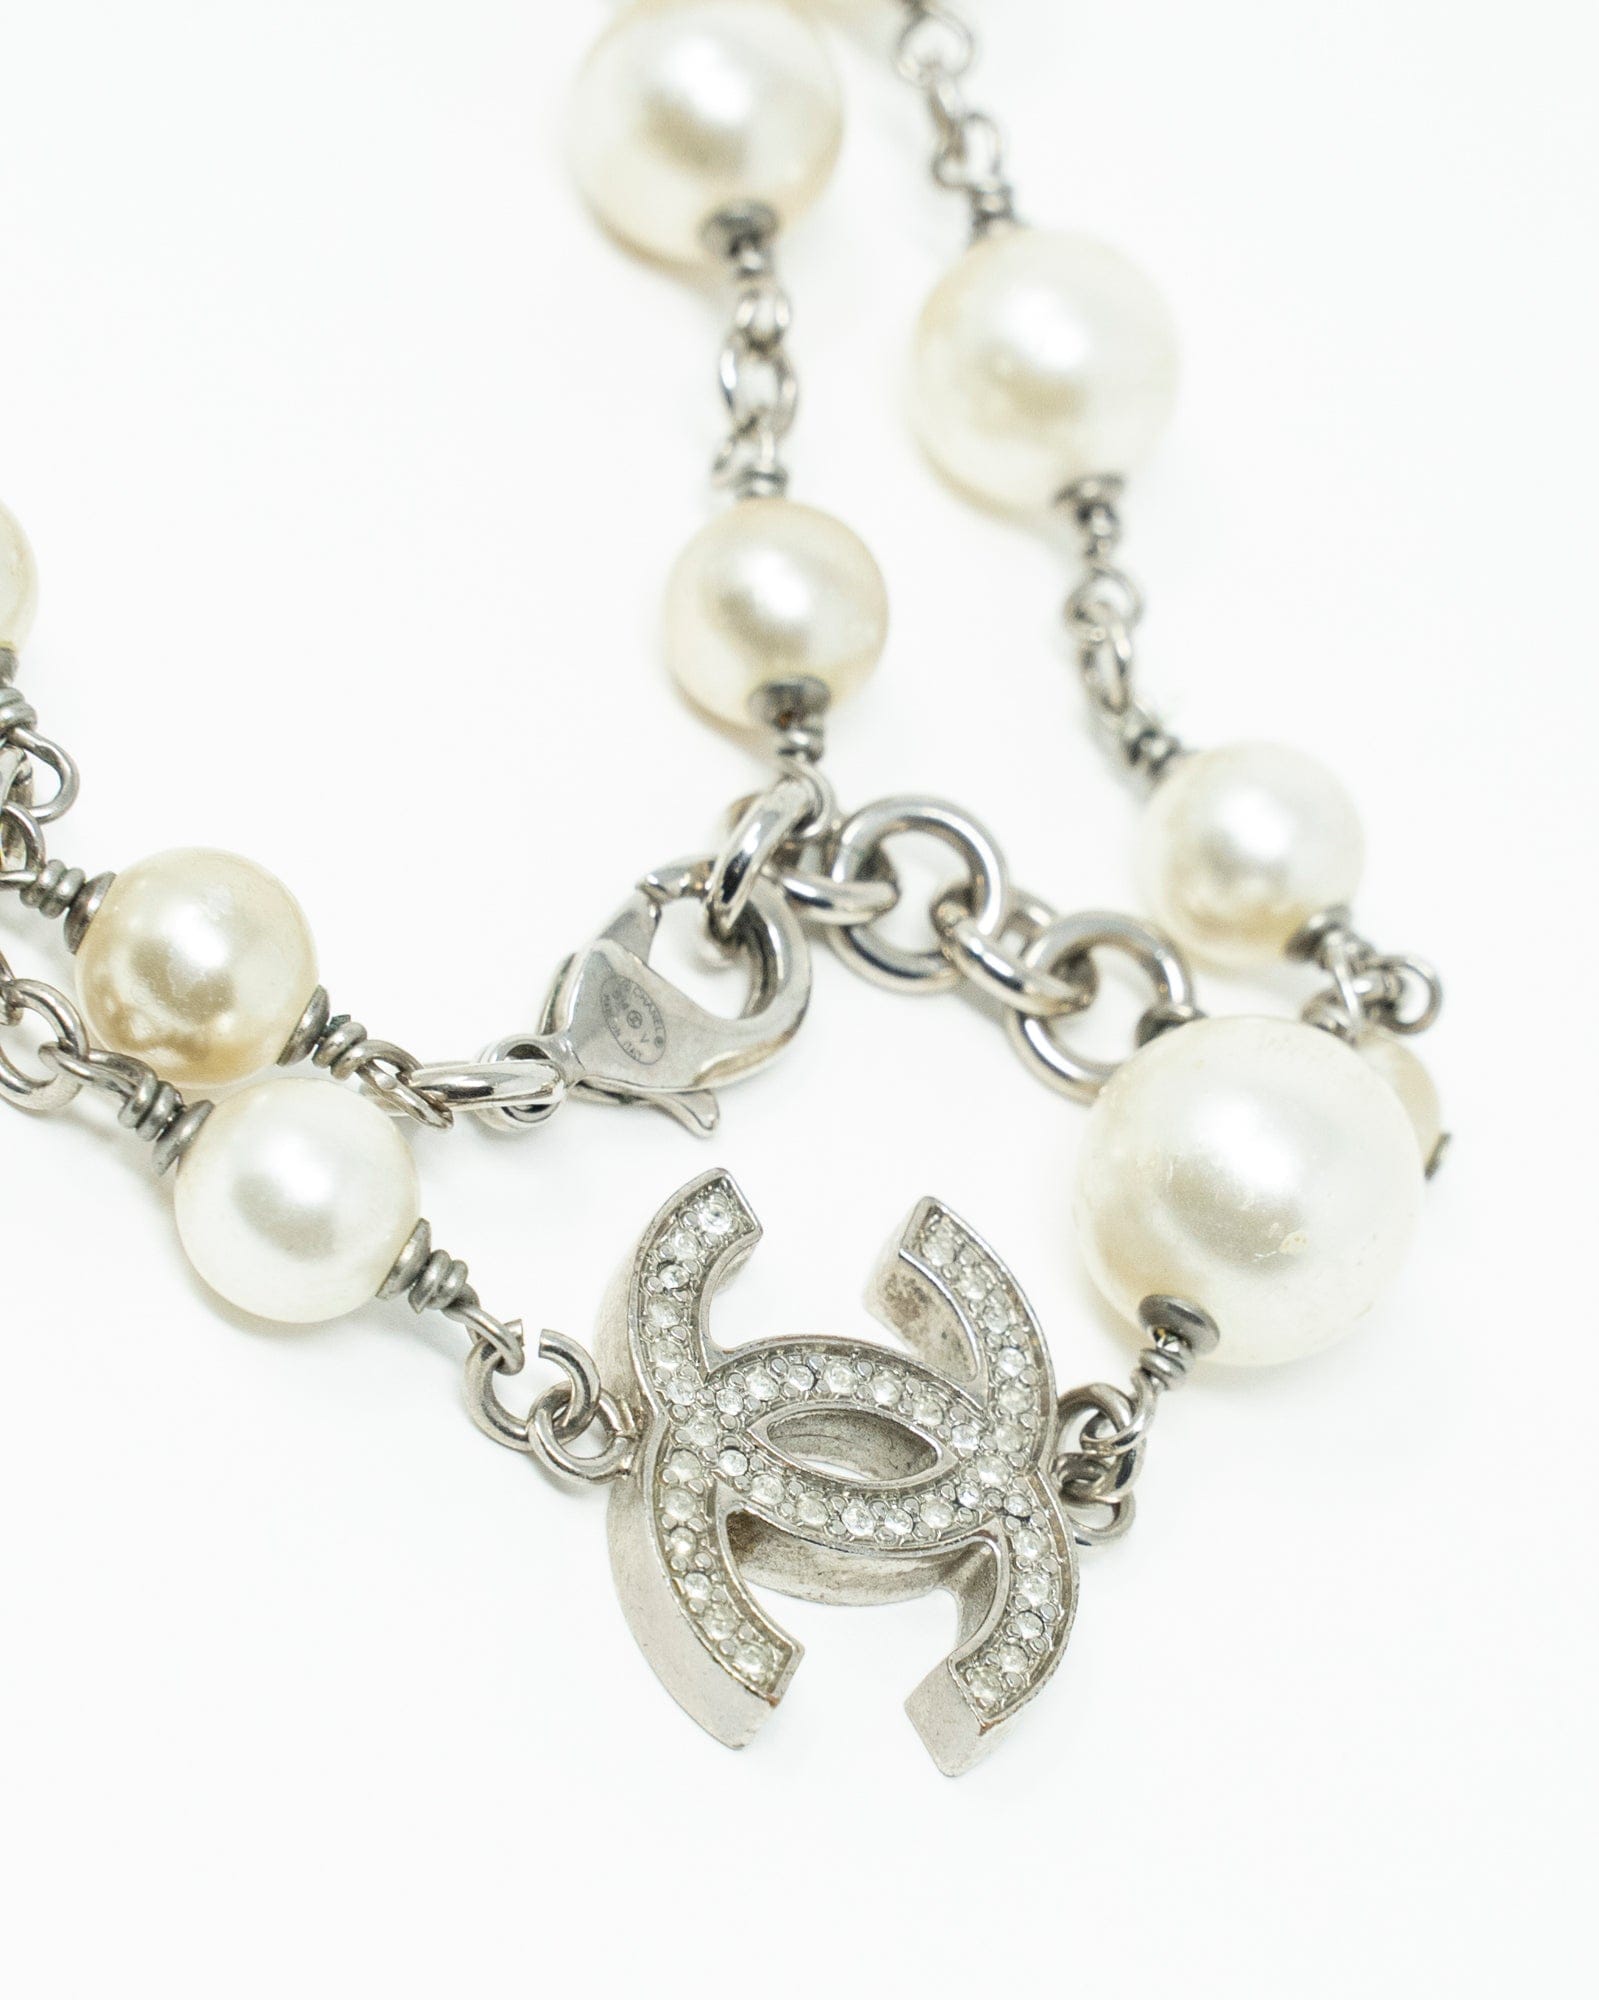 Chanel Chanel pearl necklace with CC logos - AEL1027